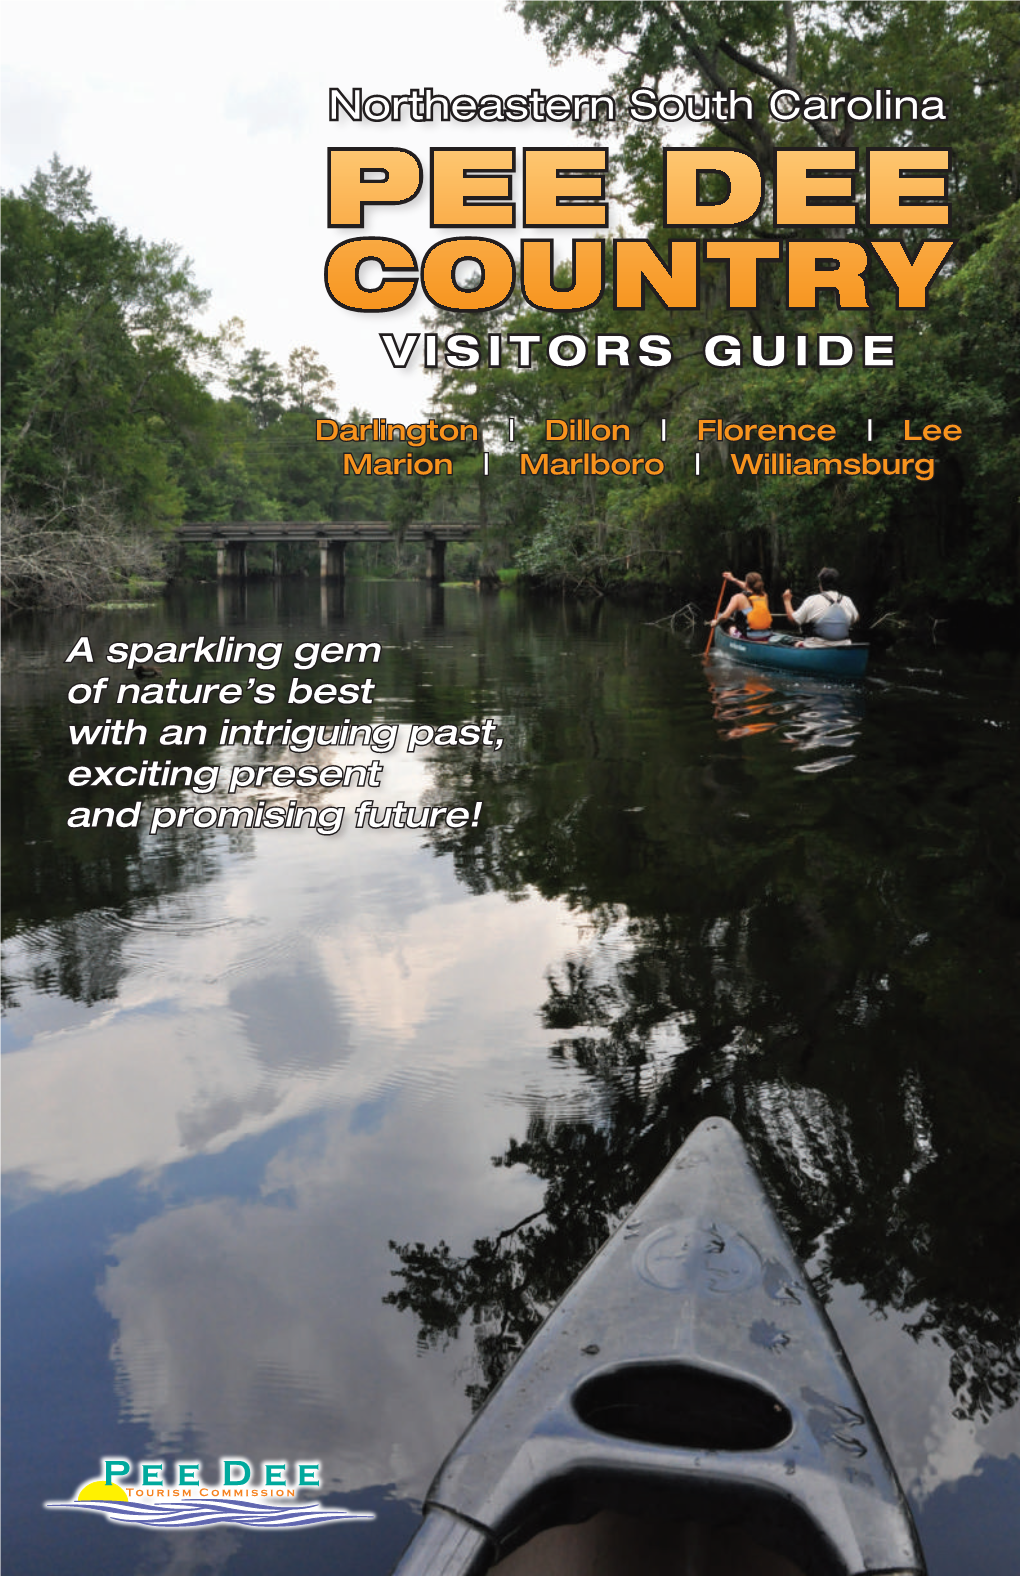 Northeastern South Carolina PEE DEE COUNTRY VISITORS GUIDE